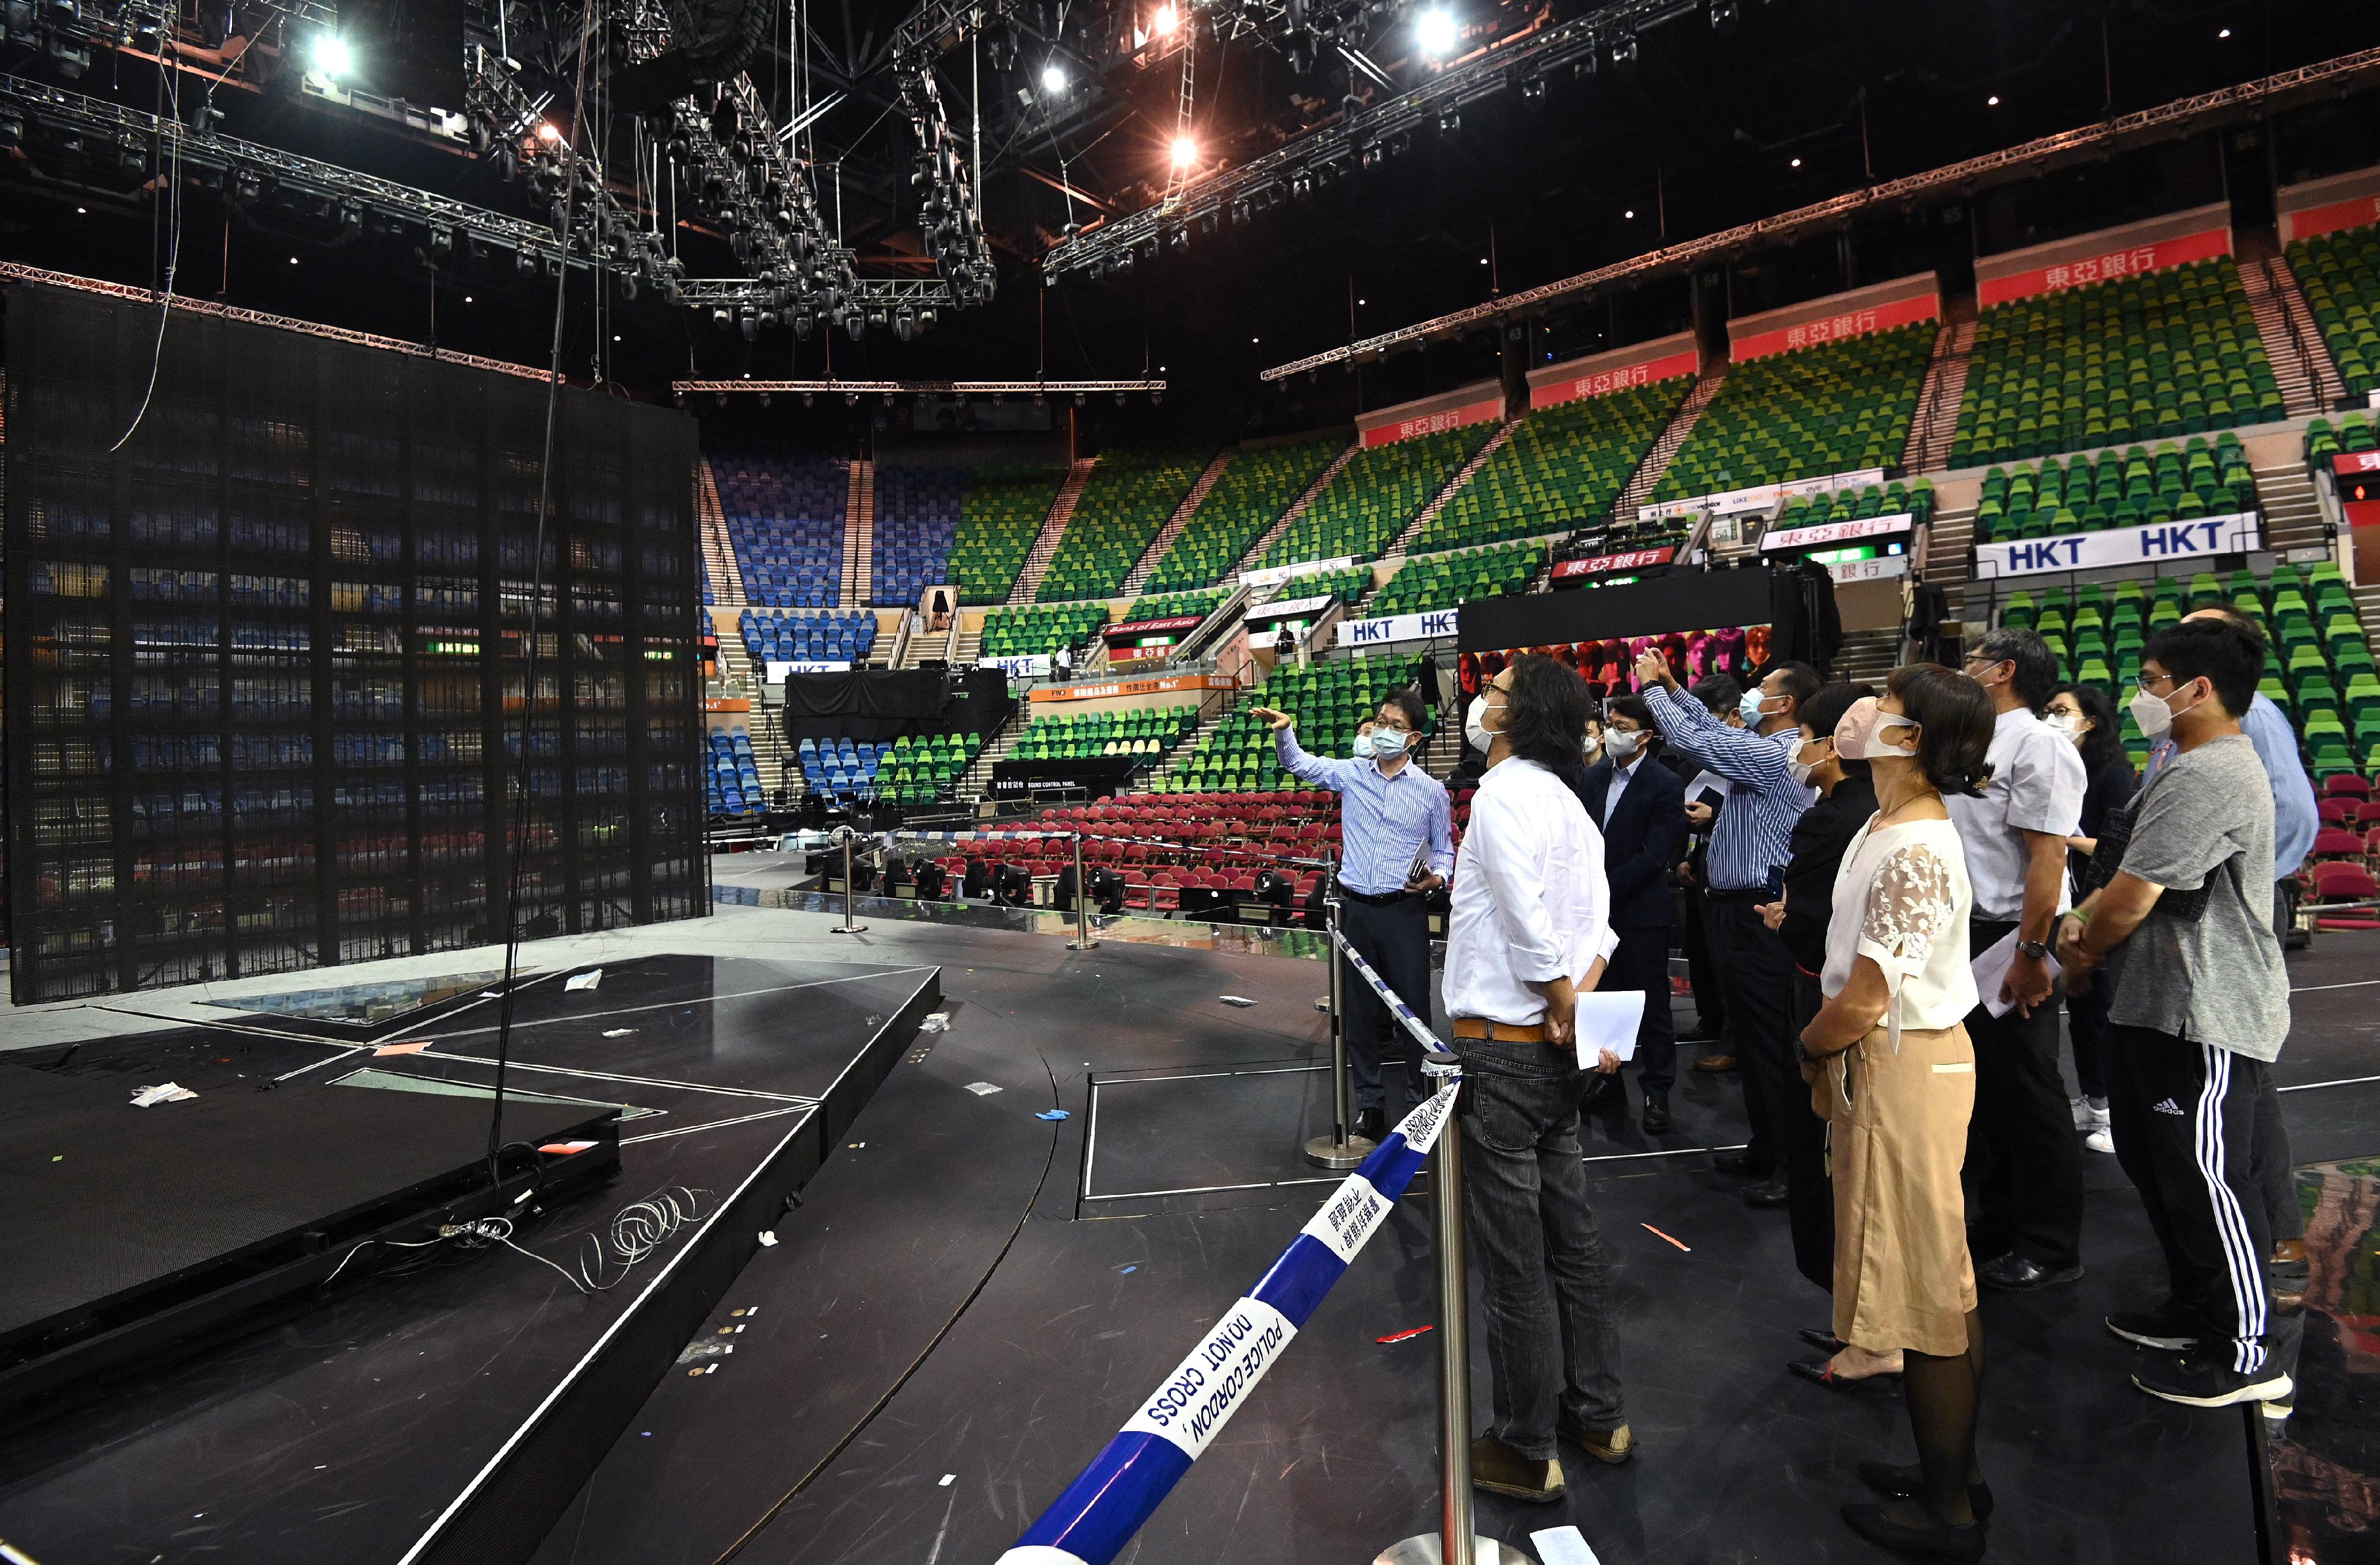 A task force led by the Leisure and Cultural Services Department to identify the cause of a serious incident occurred at Hong Kong Coliseum (HKC), suggest and follow up on recommendations, held its first meeting today (August 1) at HKC. Photo shows the task force conducting an on-site inspection at the arena of HKC.